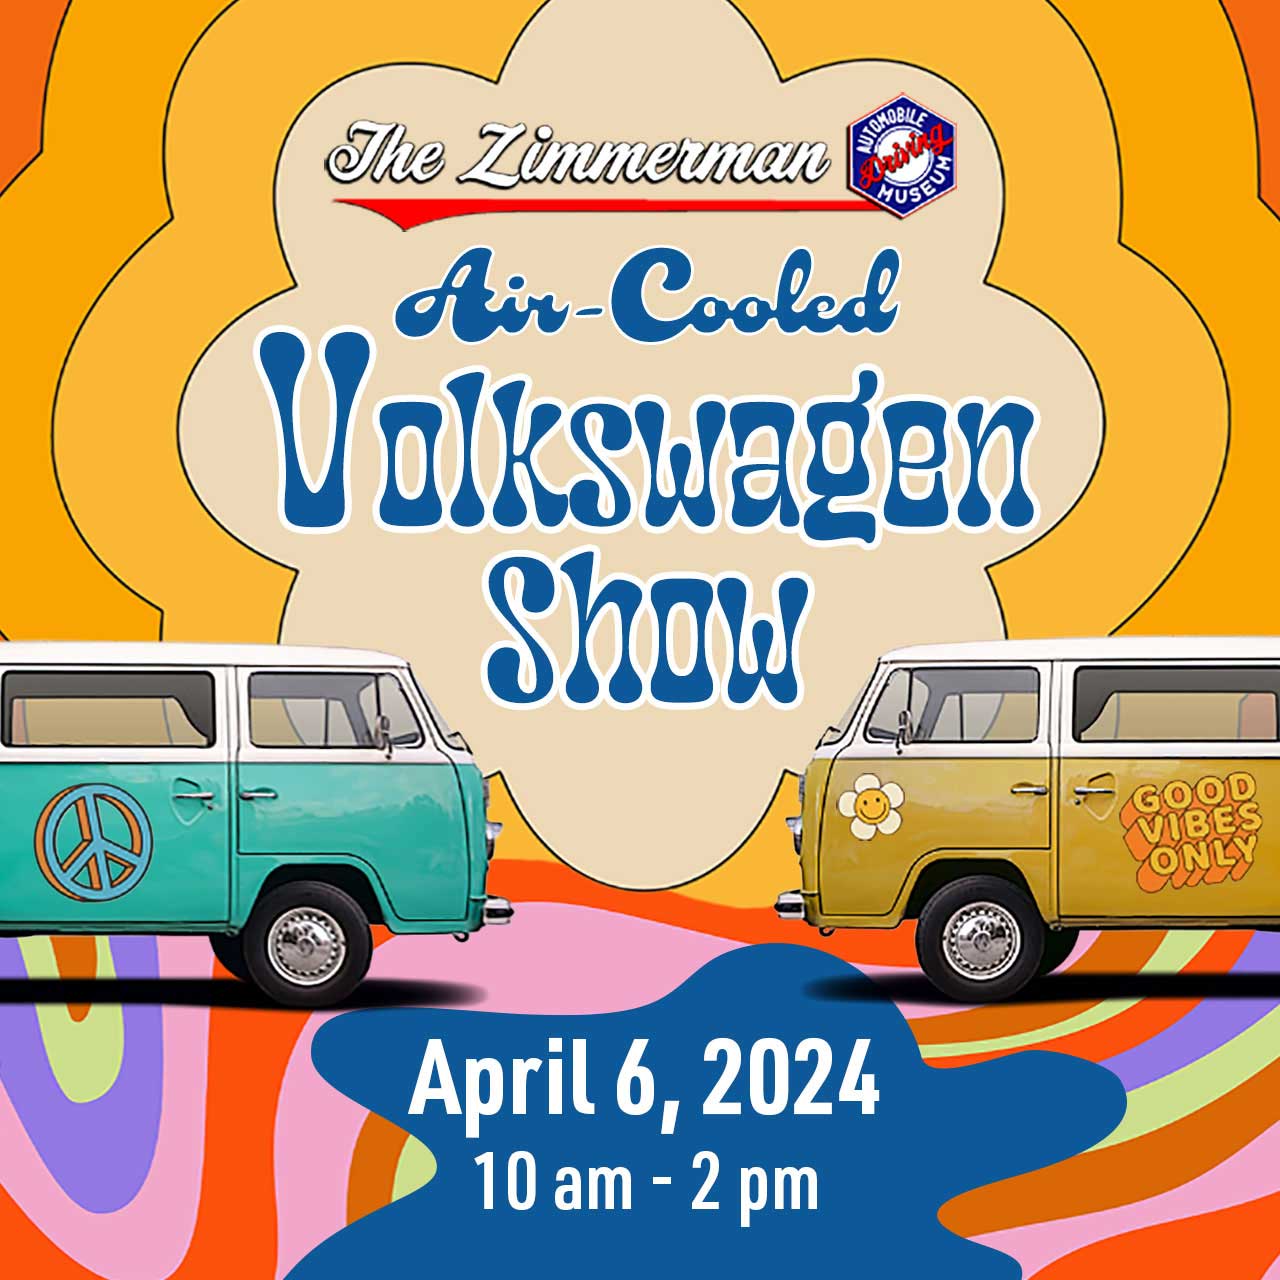 Air-Cooled Volkswagen Show - April 6, 2024, from 10 am - 2 pm